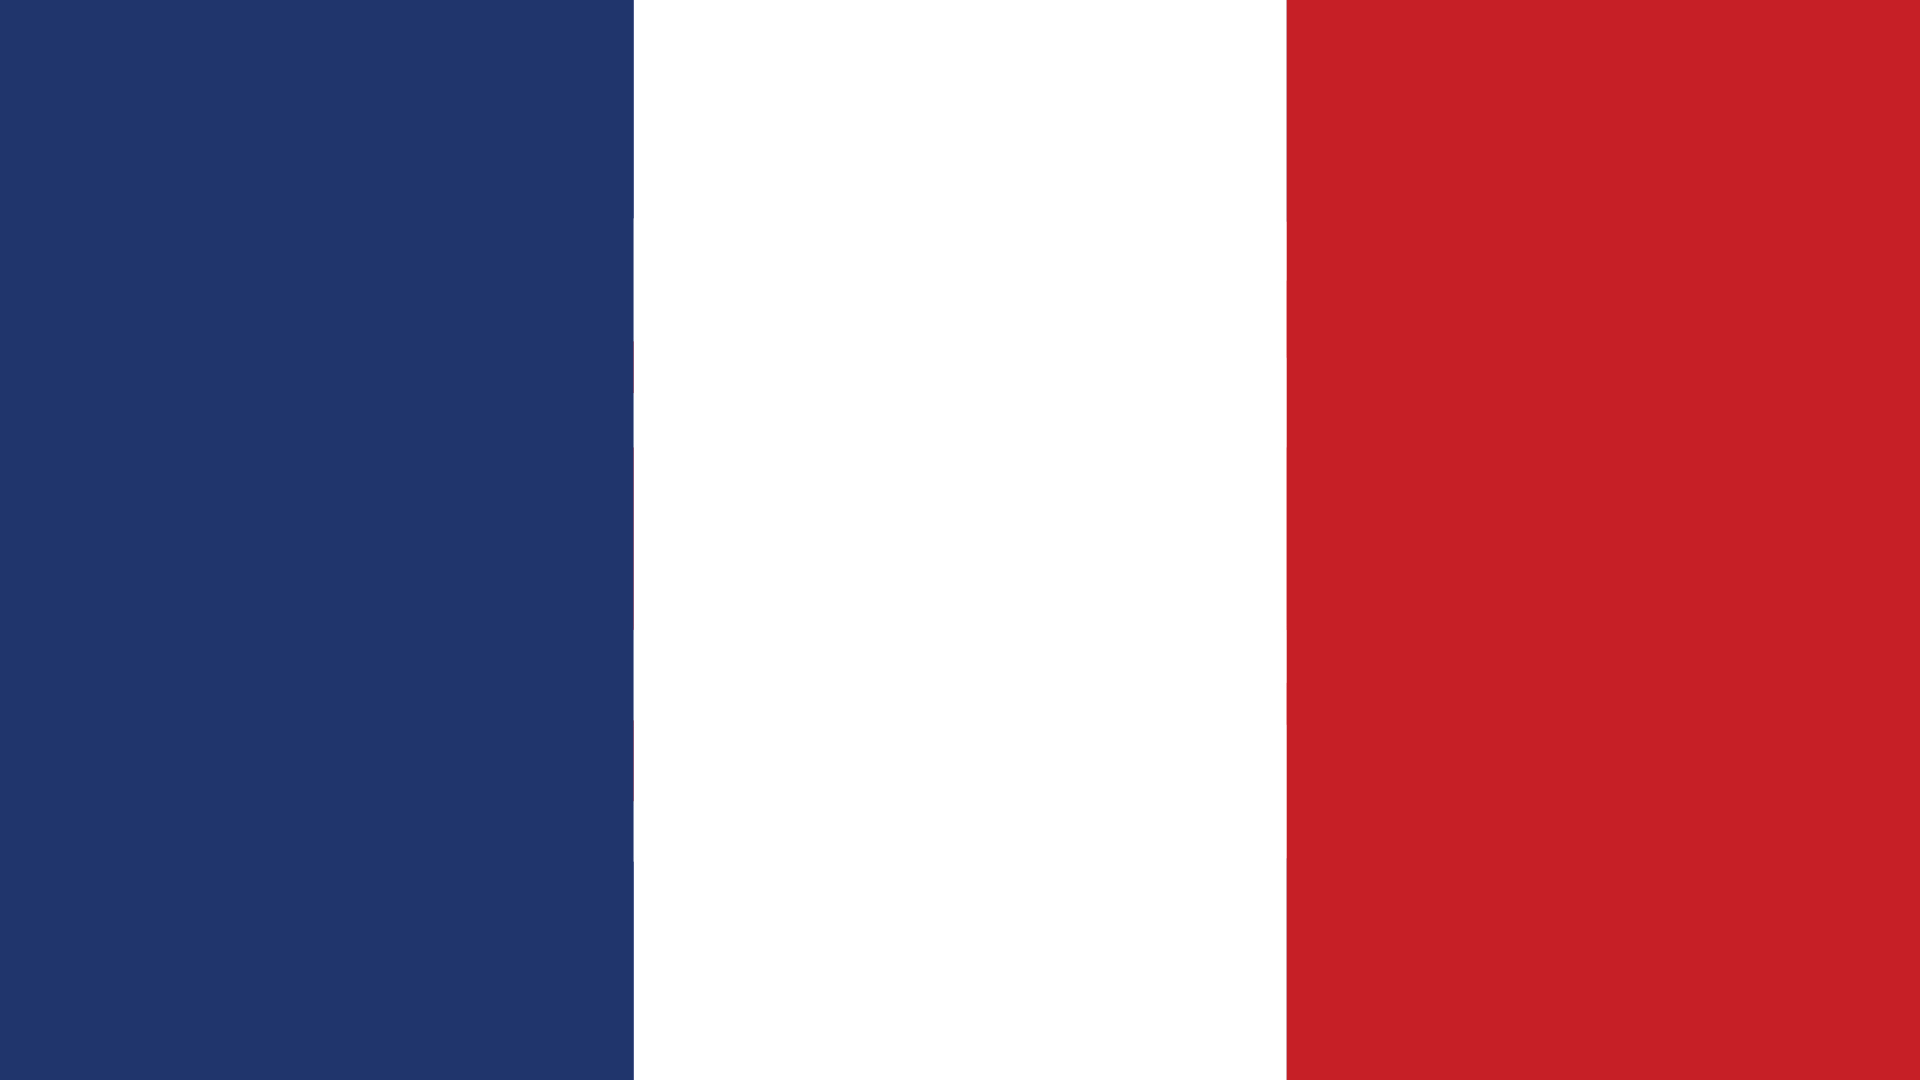 A red, white and blue flag